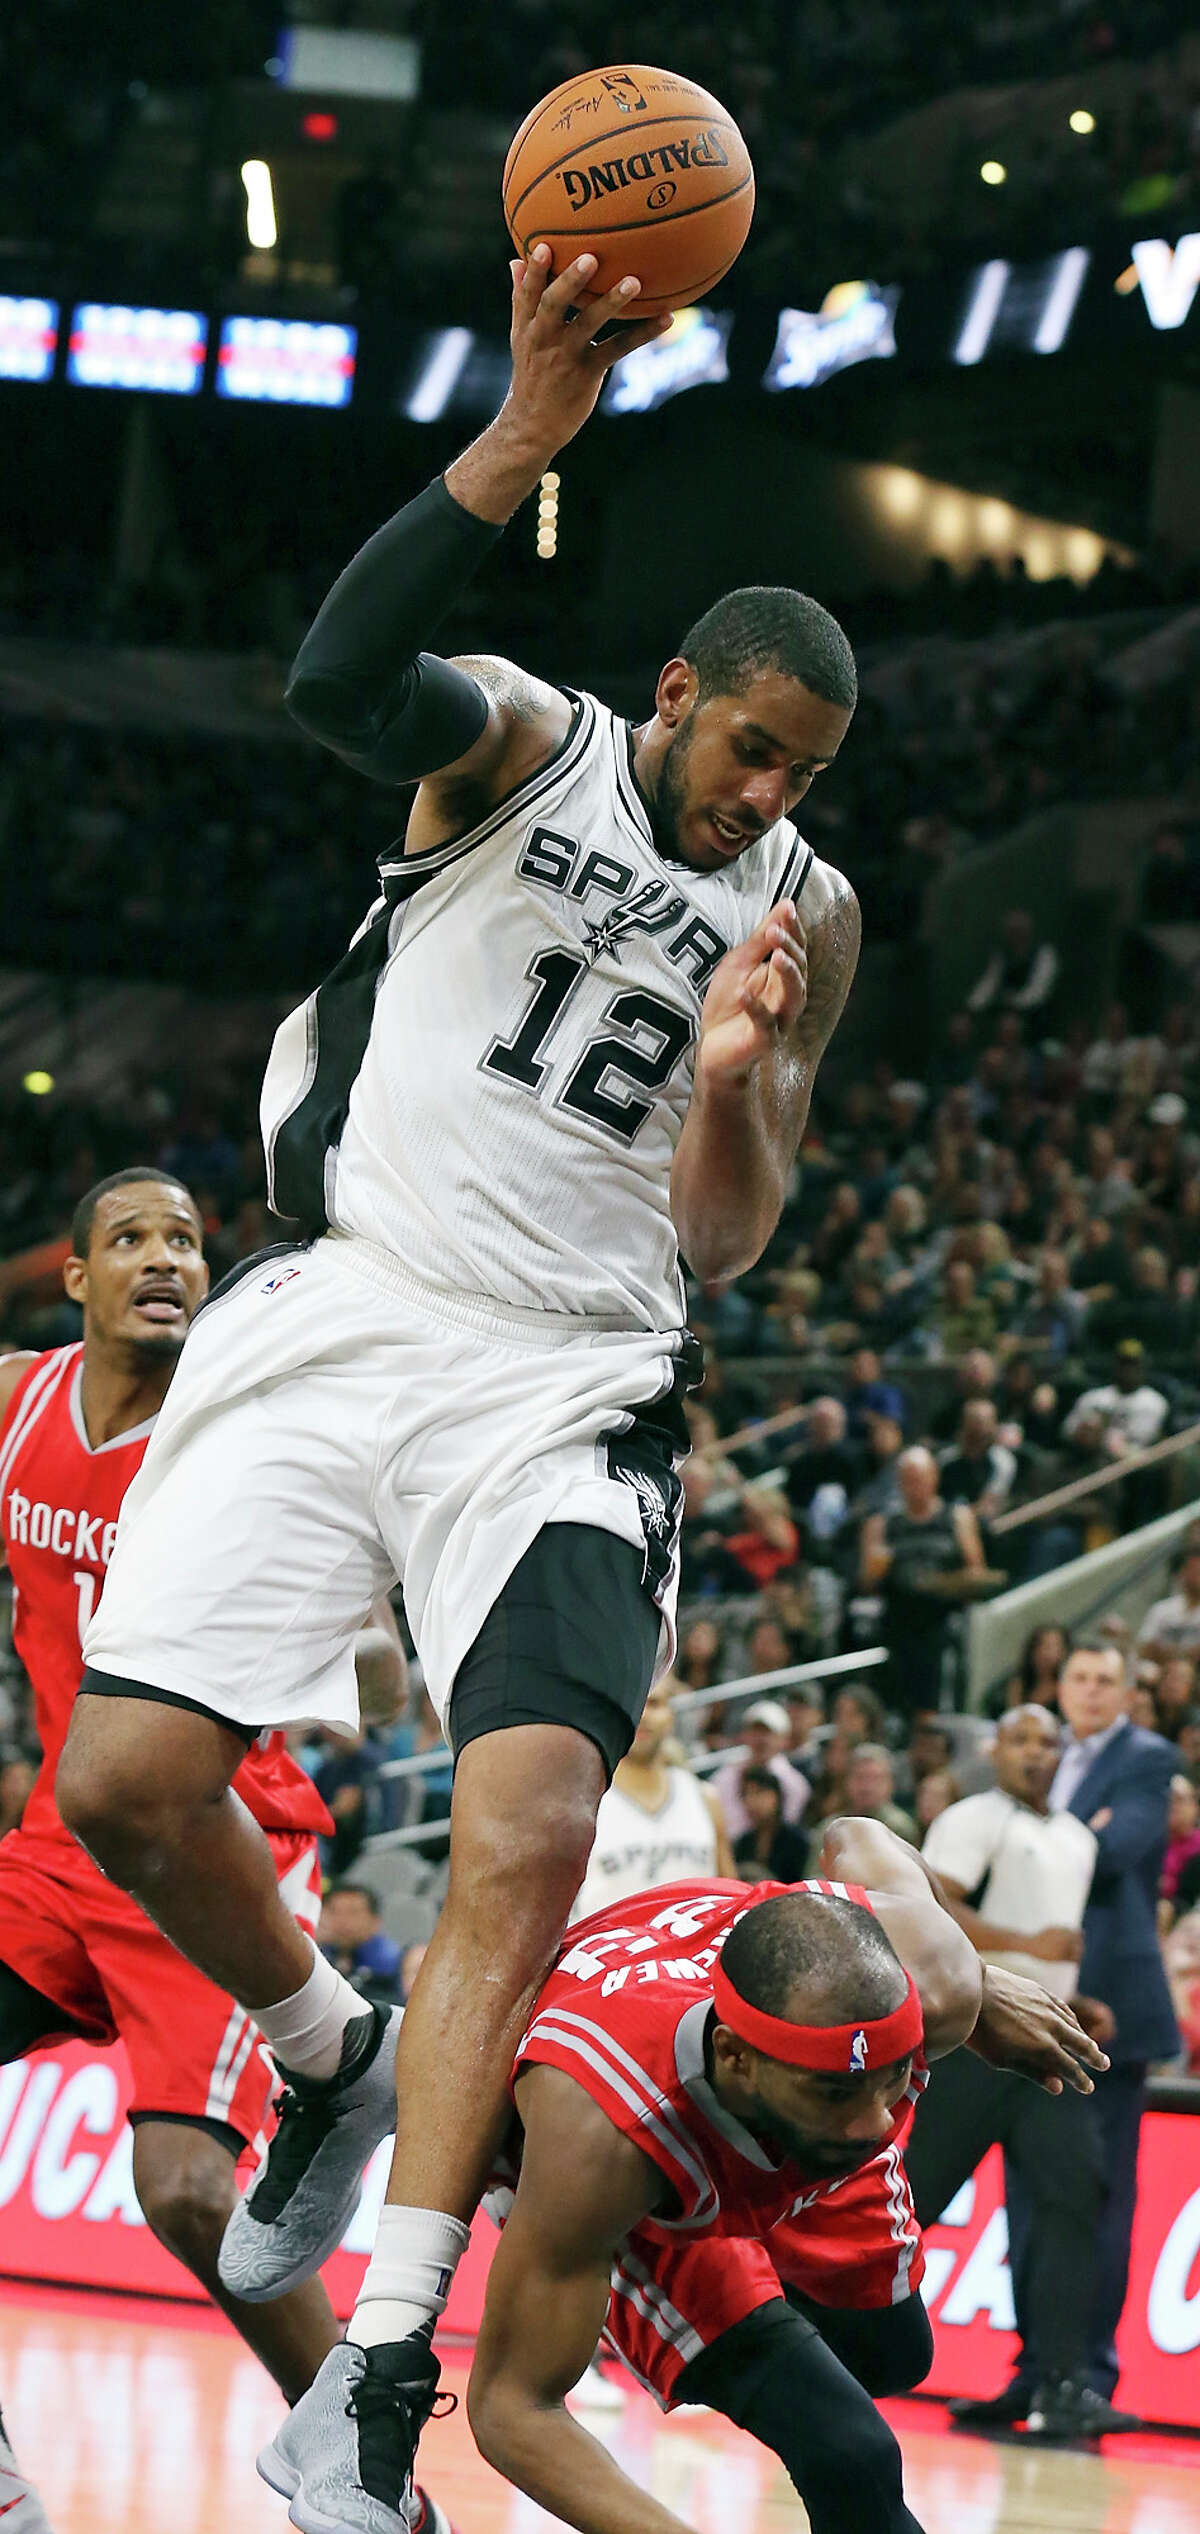 San Antonio Spurs' LaMarcus Aldridge is fouled by Houston Rockets' Corey Brewer during second half action Friday Oct. 23, 2015 at the AT&T Center. The Spurs won 111-86.